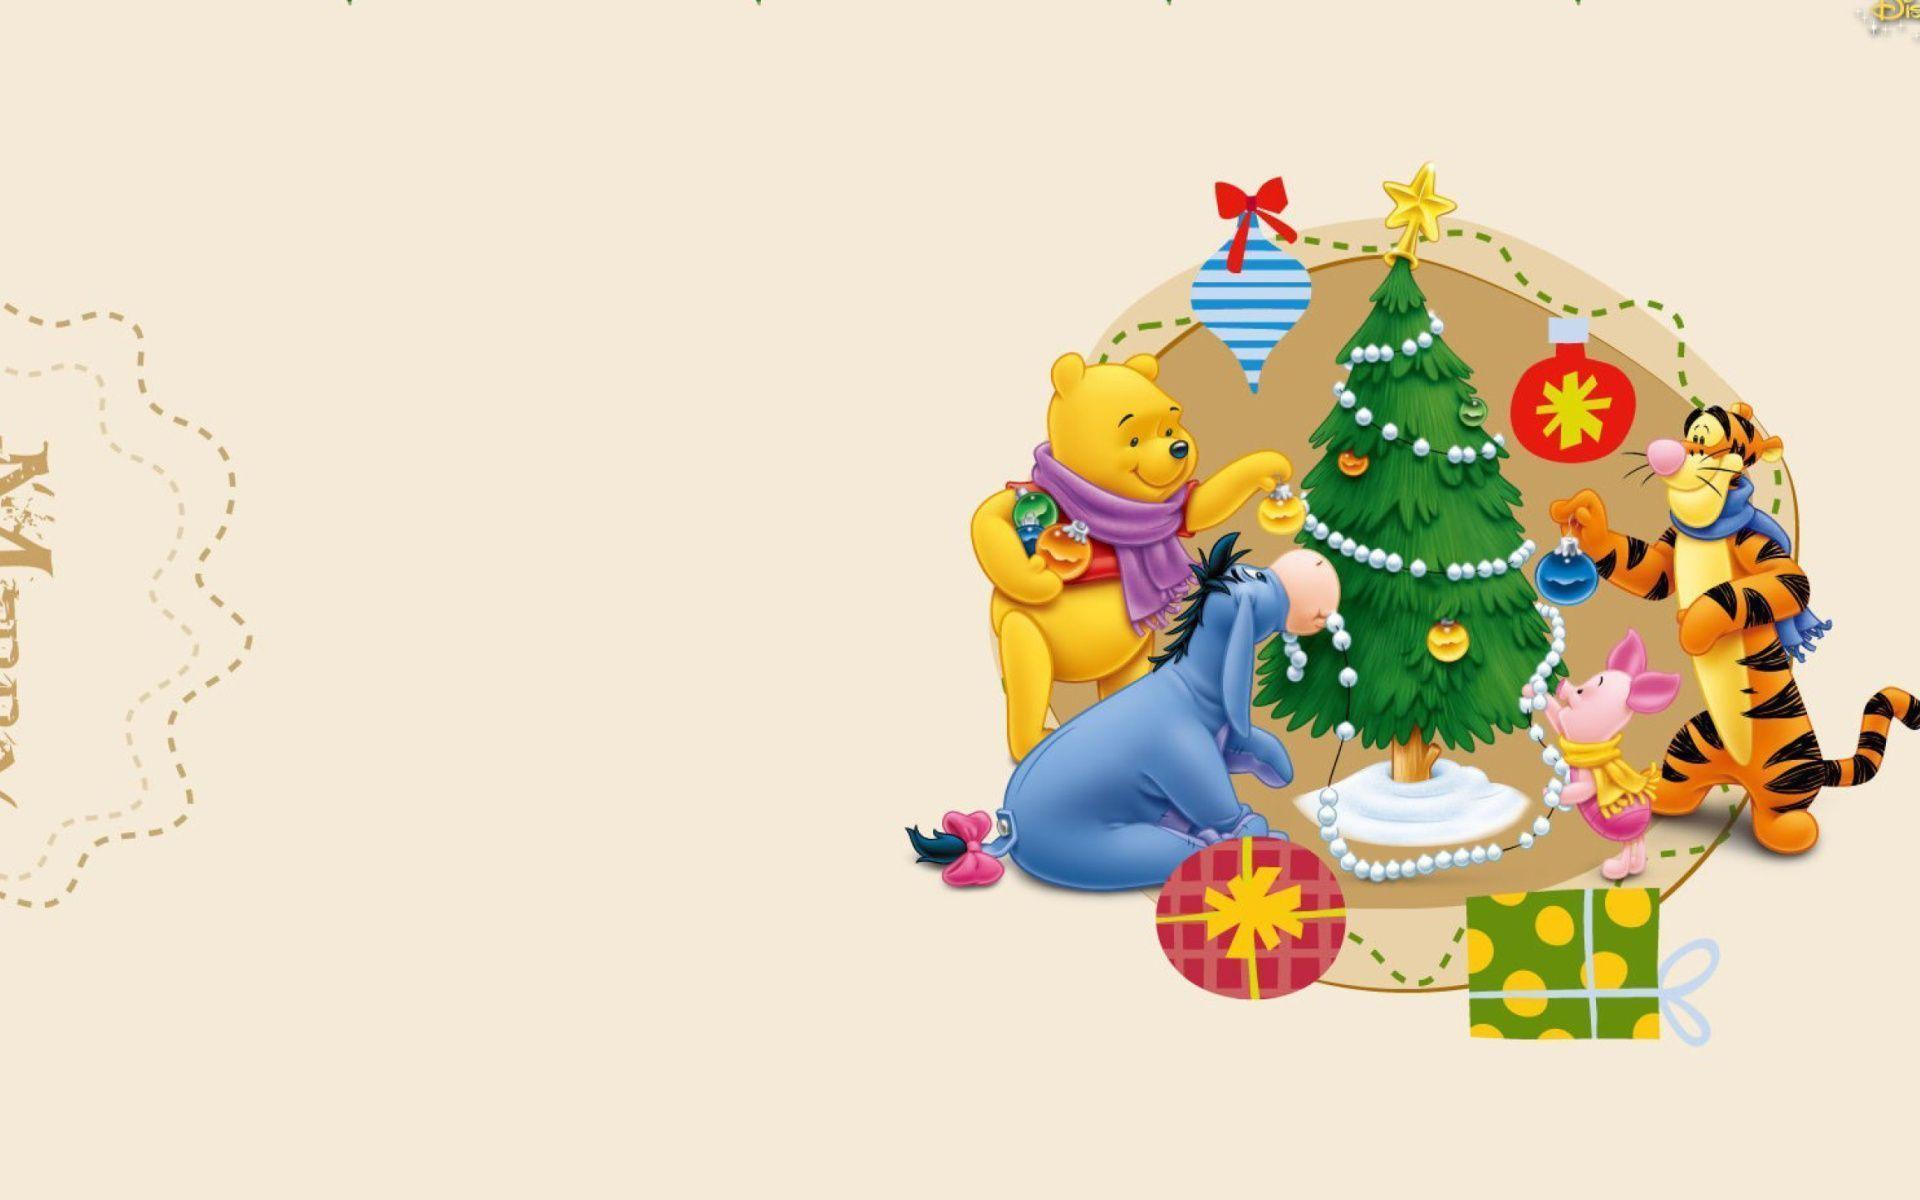 Xmas Stuff For > Winnie The Pooh Christmas Background